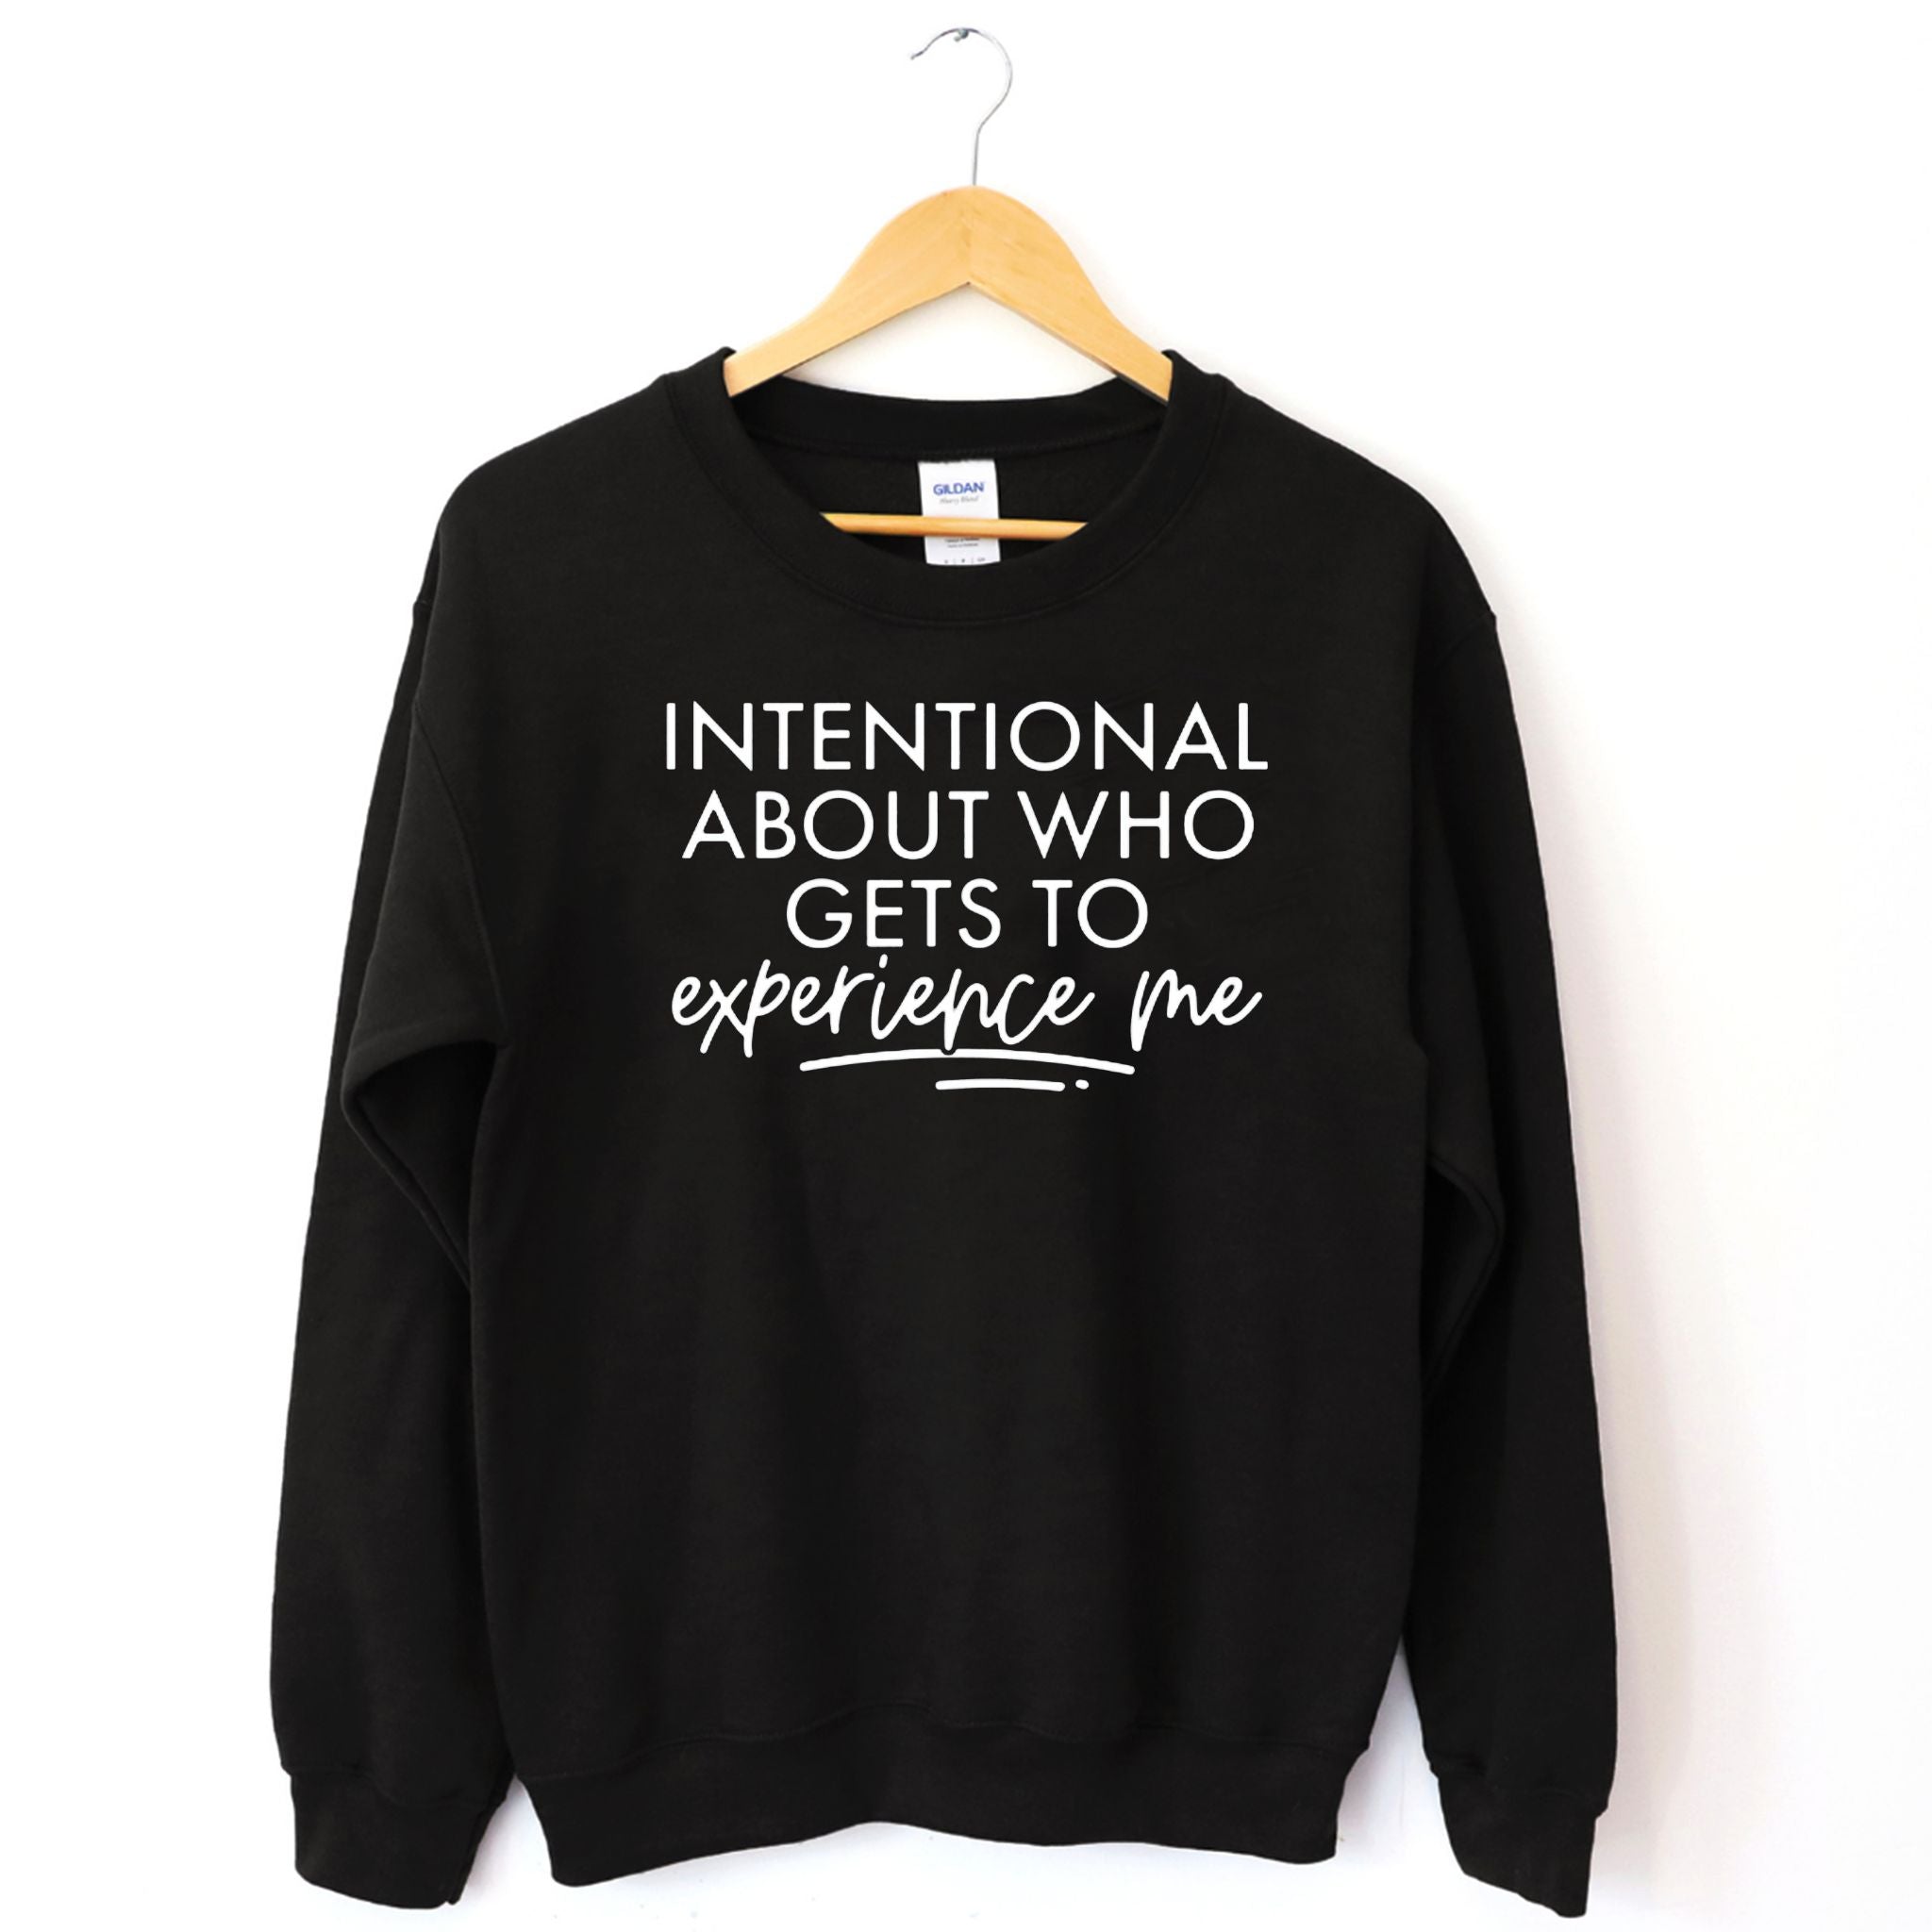 Intentional About Who Gets To Experience Me Sweatshirt